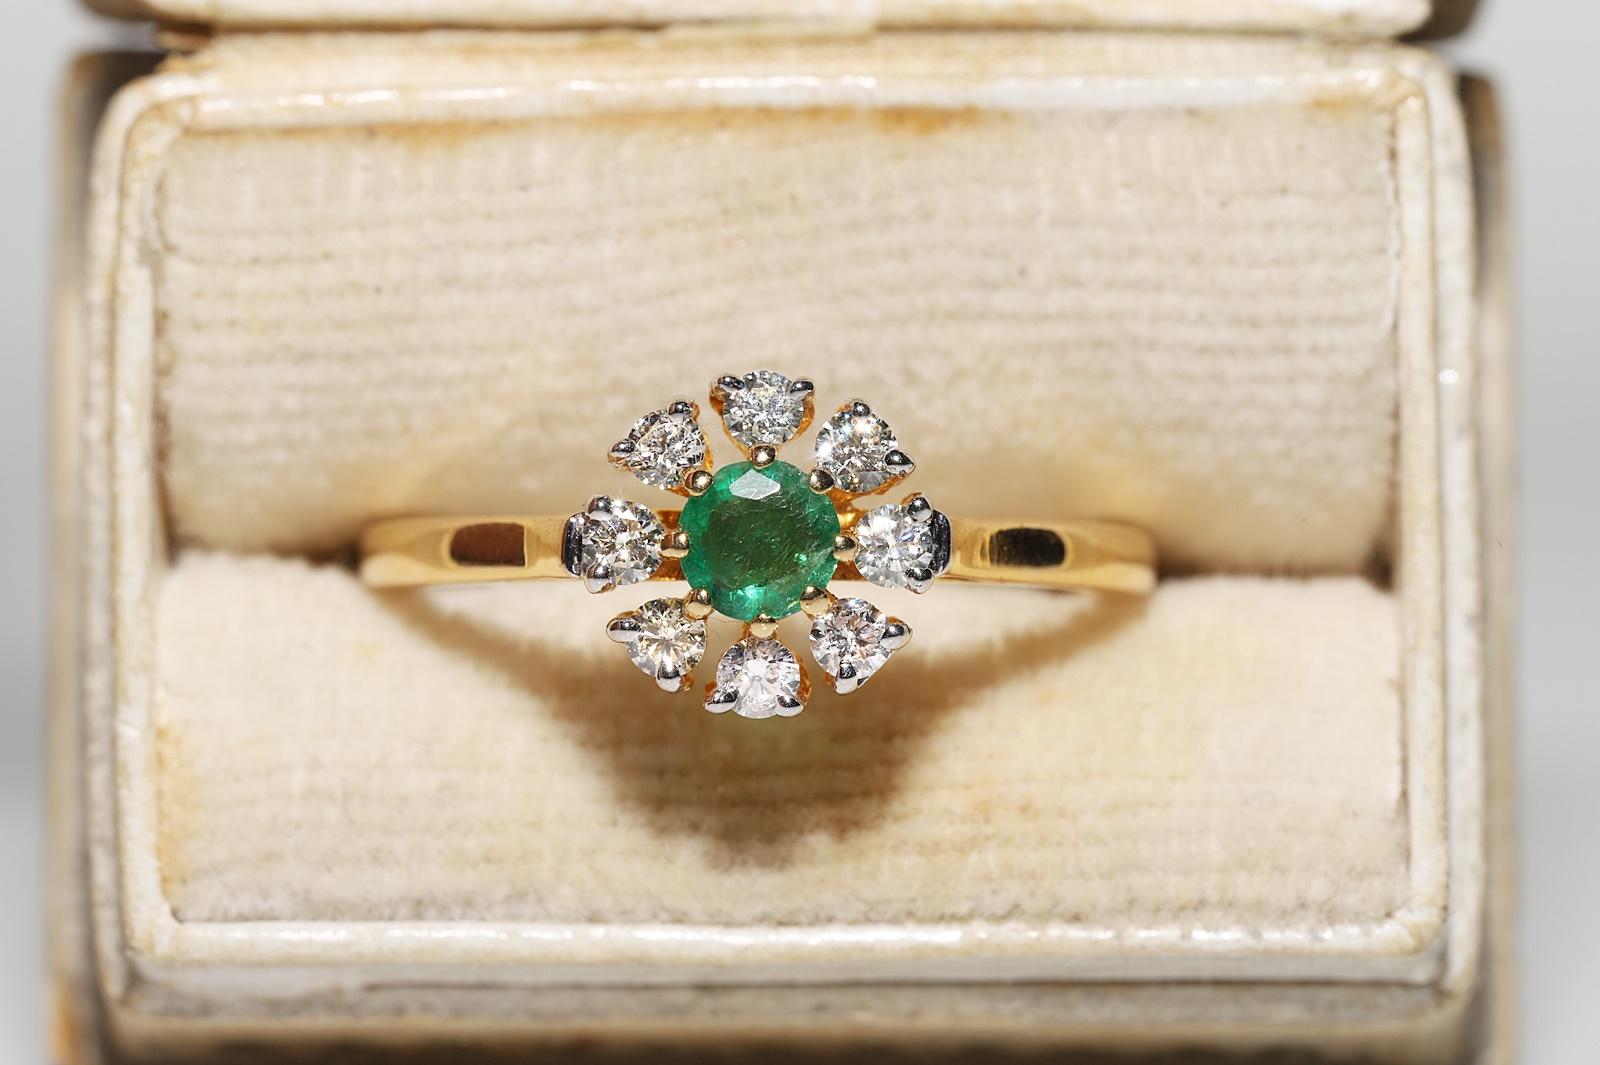 In very good condition.
Total weight is 2.6 grams.
Totally is diamond about 0.25 ct.
The diamond is has vvs-vs-s1 clarity and H-I color.
Totally is emerald 0.20 ct.
Ring size is US 7 (We offer free resizing)
We can make any size.
Box is not